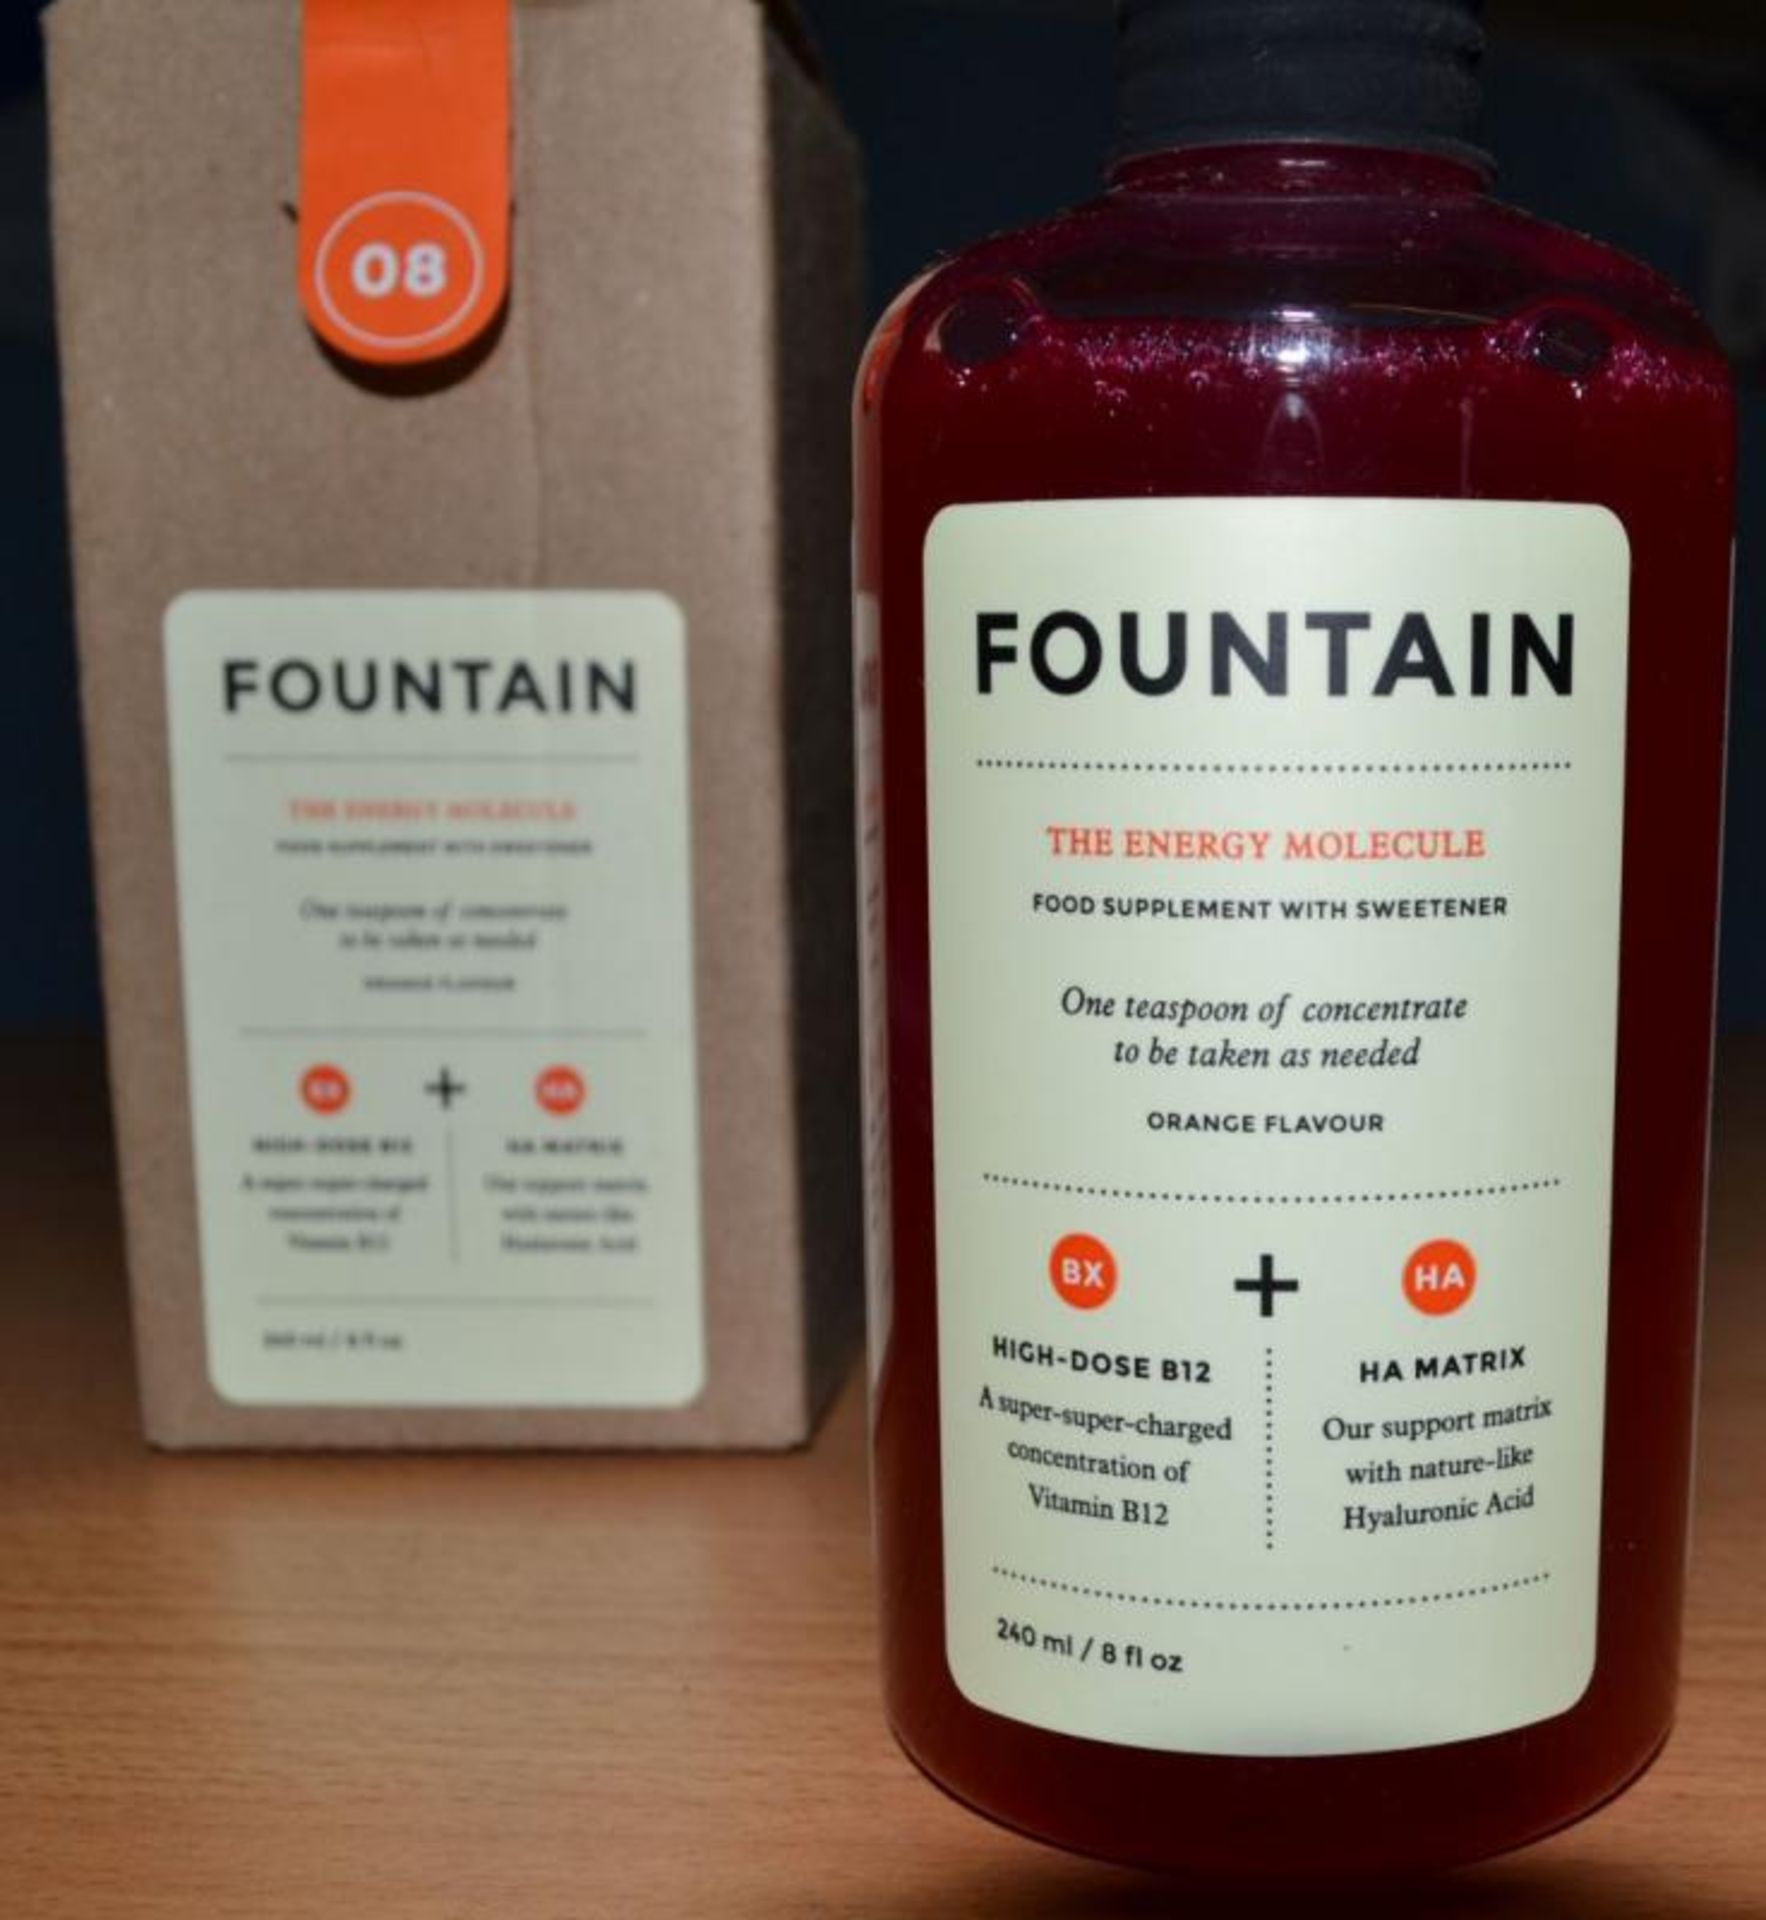 10 x 240ml Bottles of Fountain, The Energy Molecule Supplement - New & Boxed - CL185 - Ref: DRT0643 - Image 4 of 7